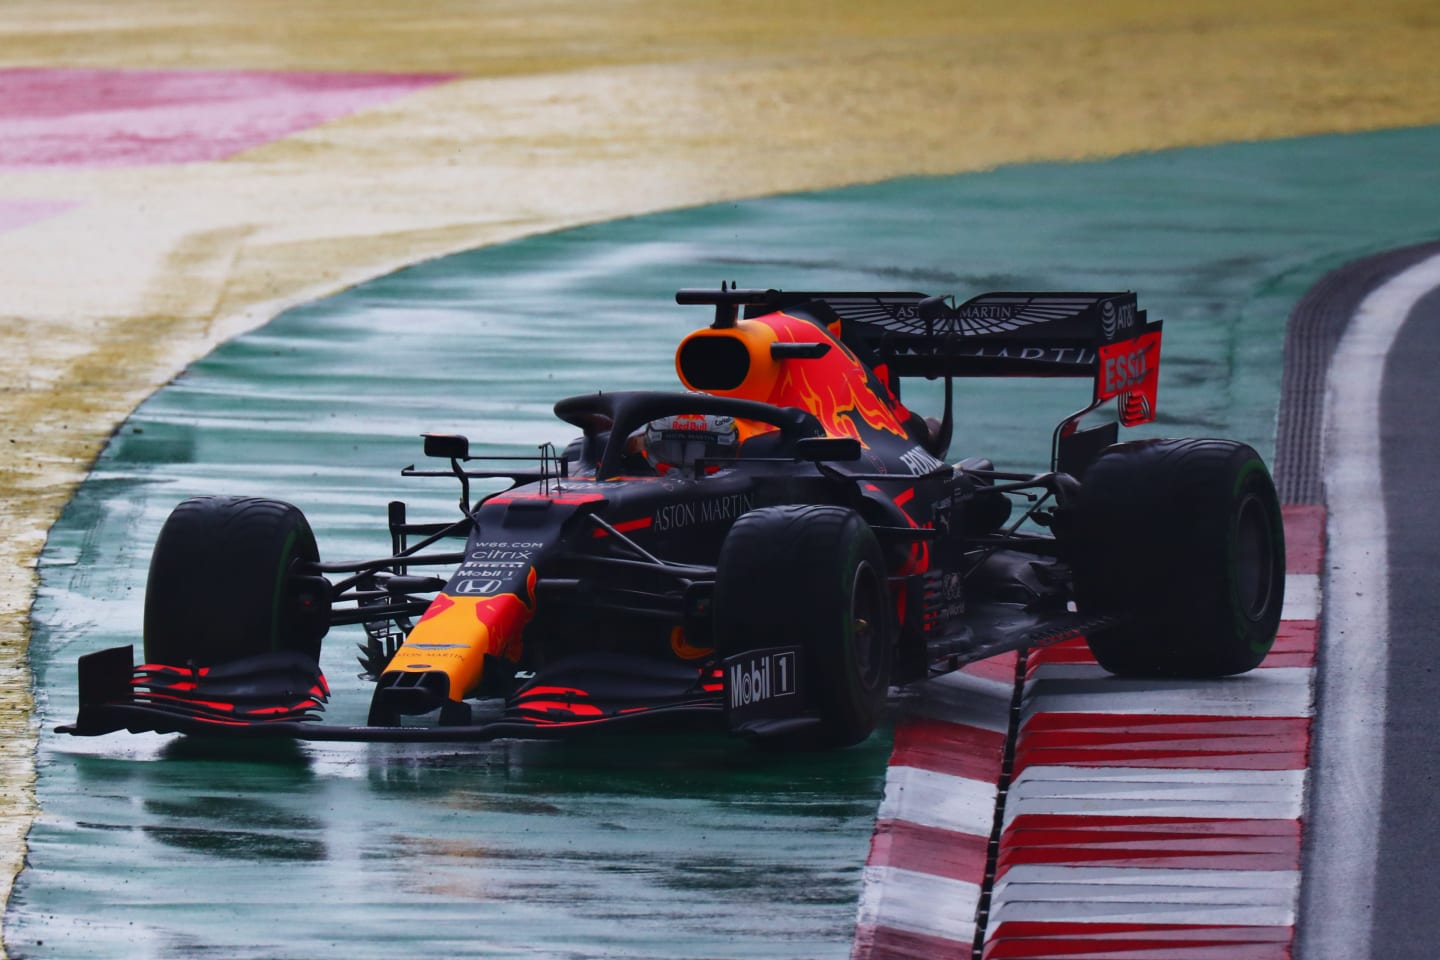 ISTANBUL, TURKEY - NOVEMBER 14: Max Verstappen of the Netherlands driving the (33) Aston Martin Red Bull Racing RB16 runs wide during qualifying ahead of the F1 Grand Prix of Turkey at Intercity Istanbul Park on November 14, 2020 in Istanbul, Turkey. (Photo by Dan Istitene - Formula 1/Formula 1 via Getty Images)